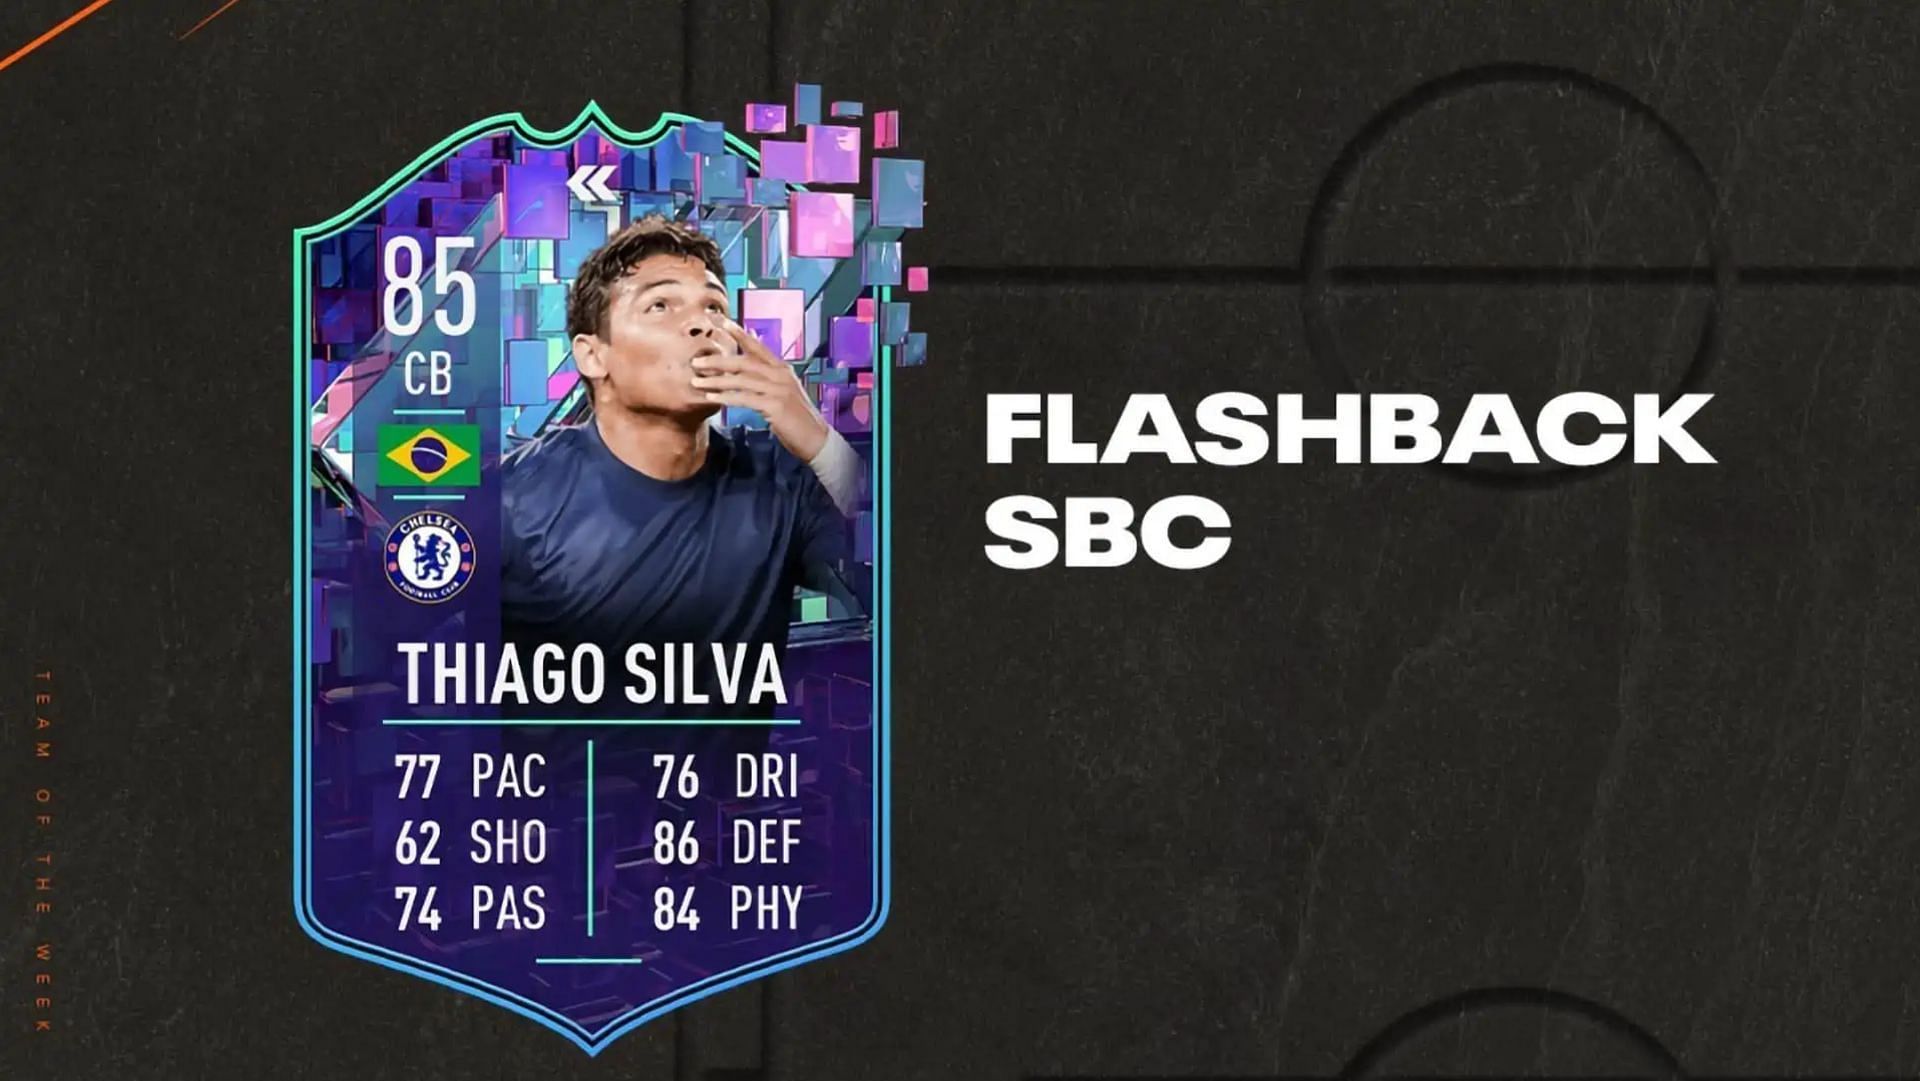 Fifa 23 Thiago Silva Flashback Sbc - How To Complete, Estimated Costs, And  More